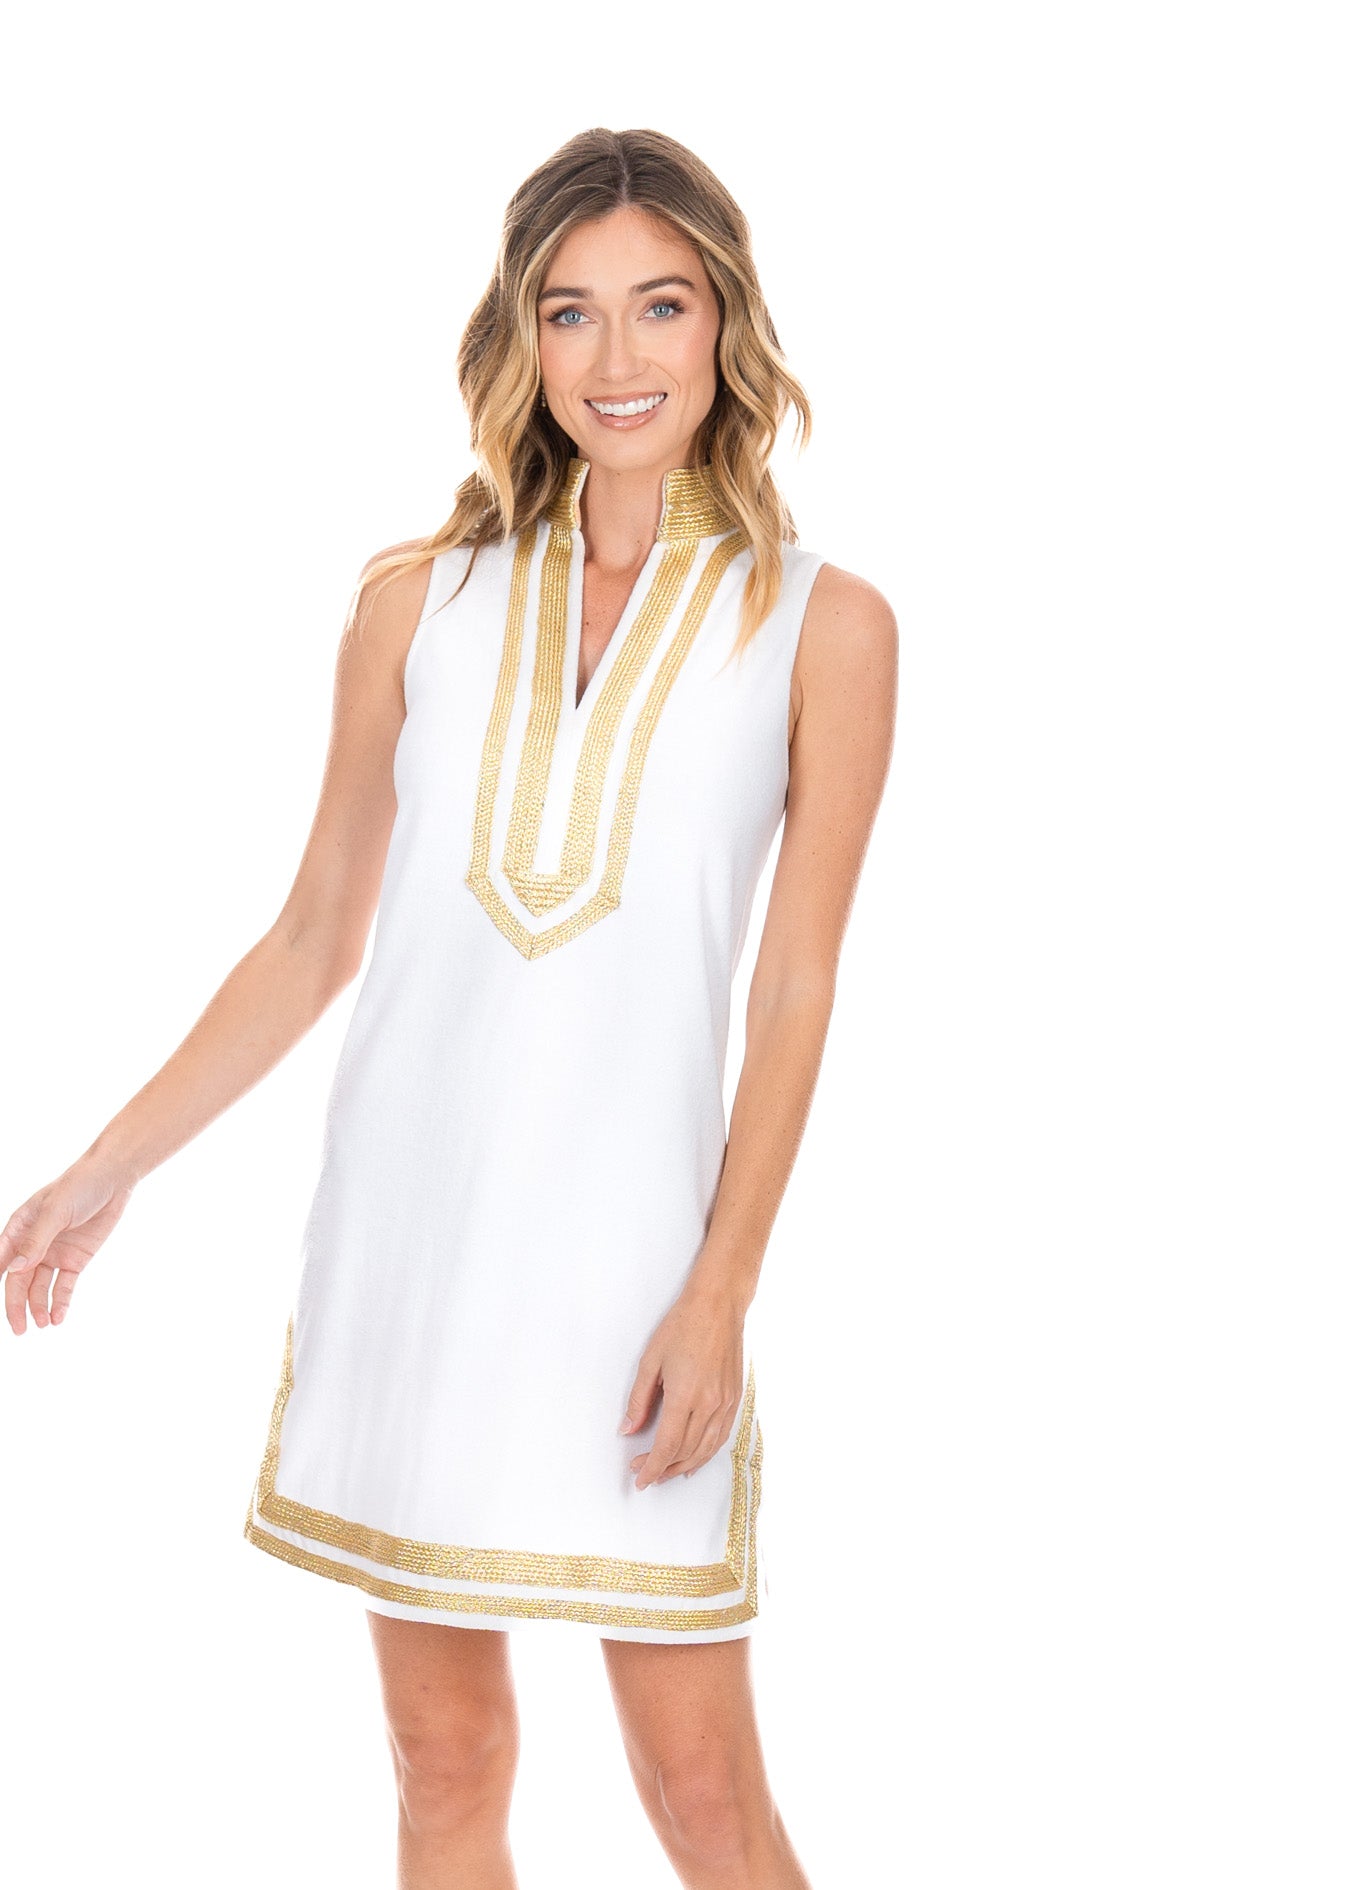 Blonde woman wearing White/Gold Sleeveless Terry Tunic while smiling. 